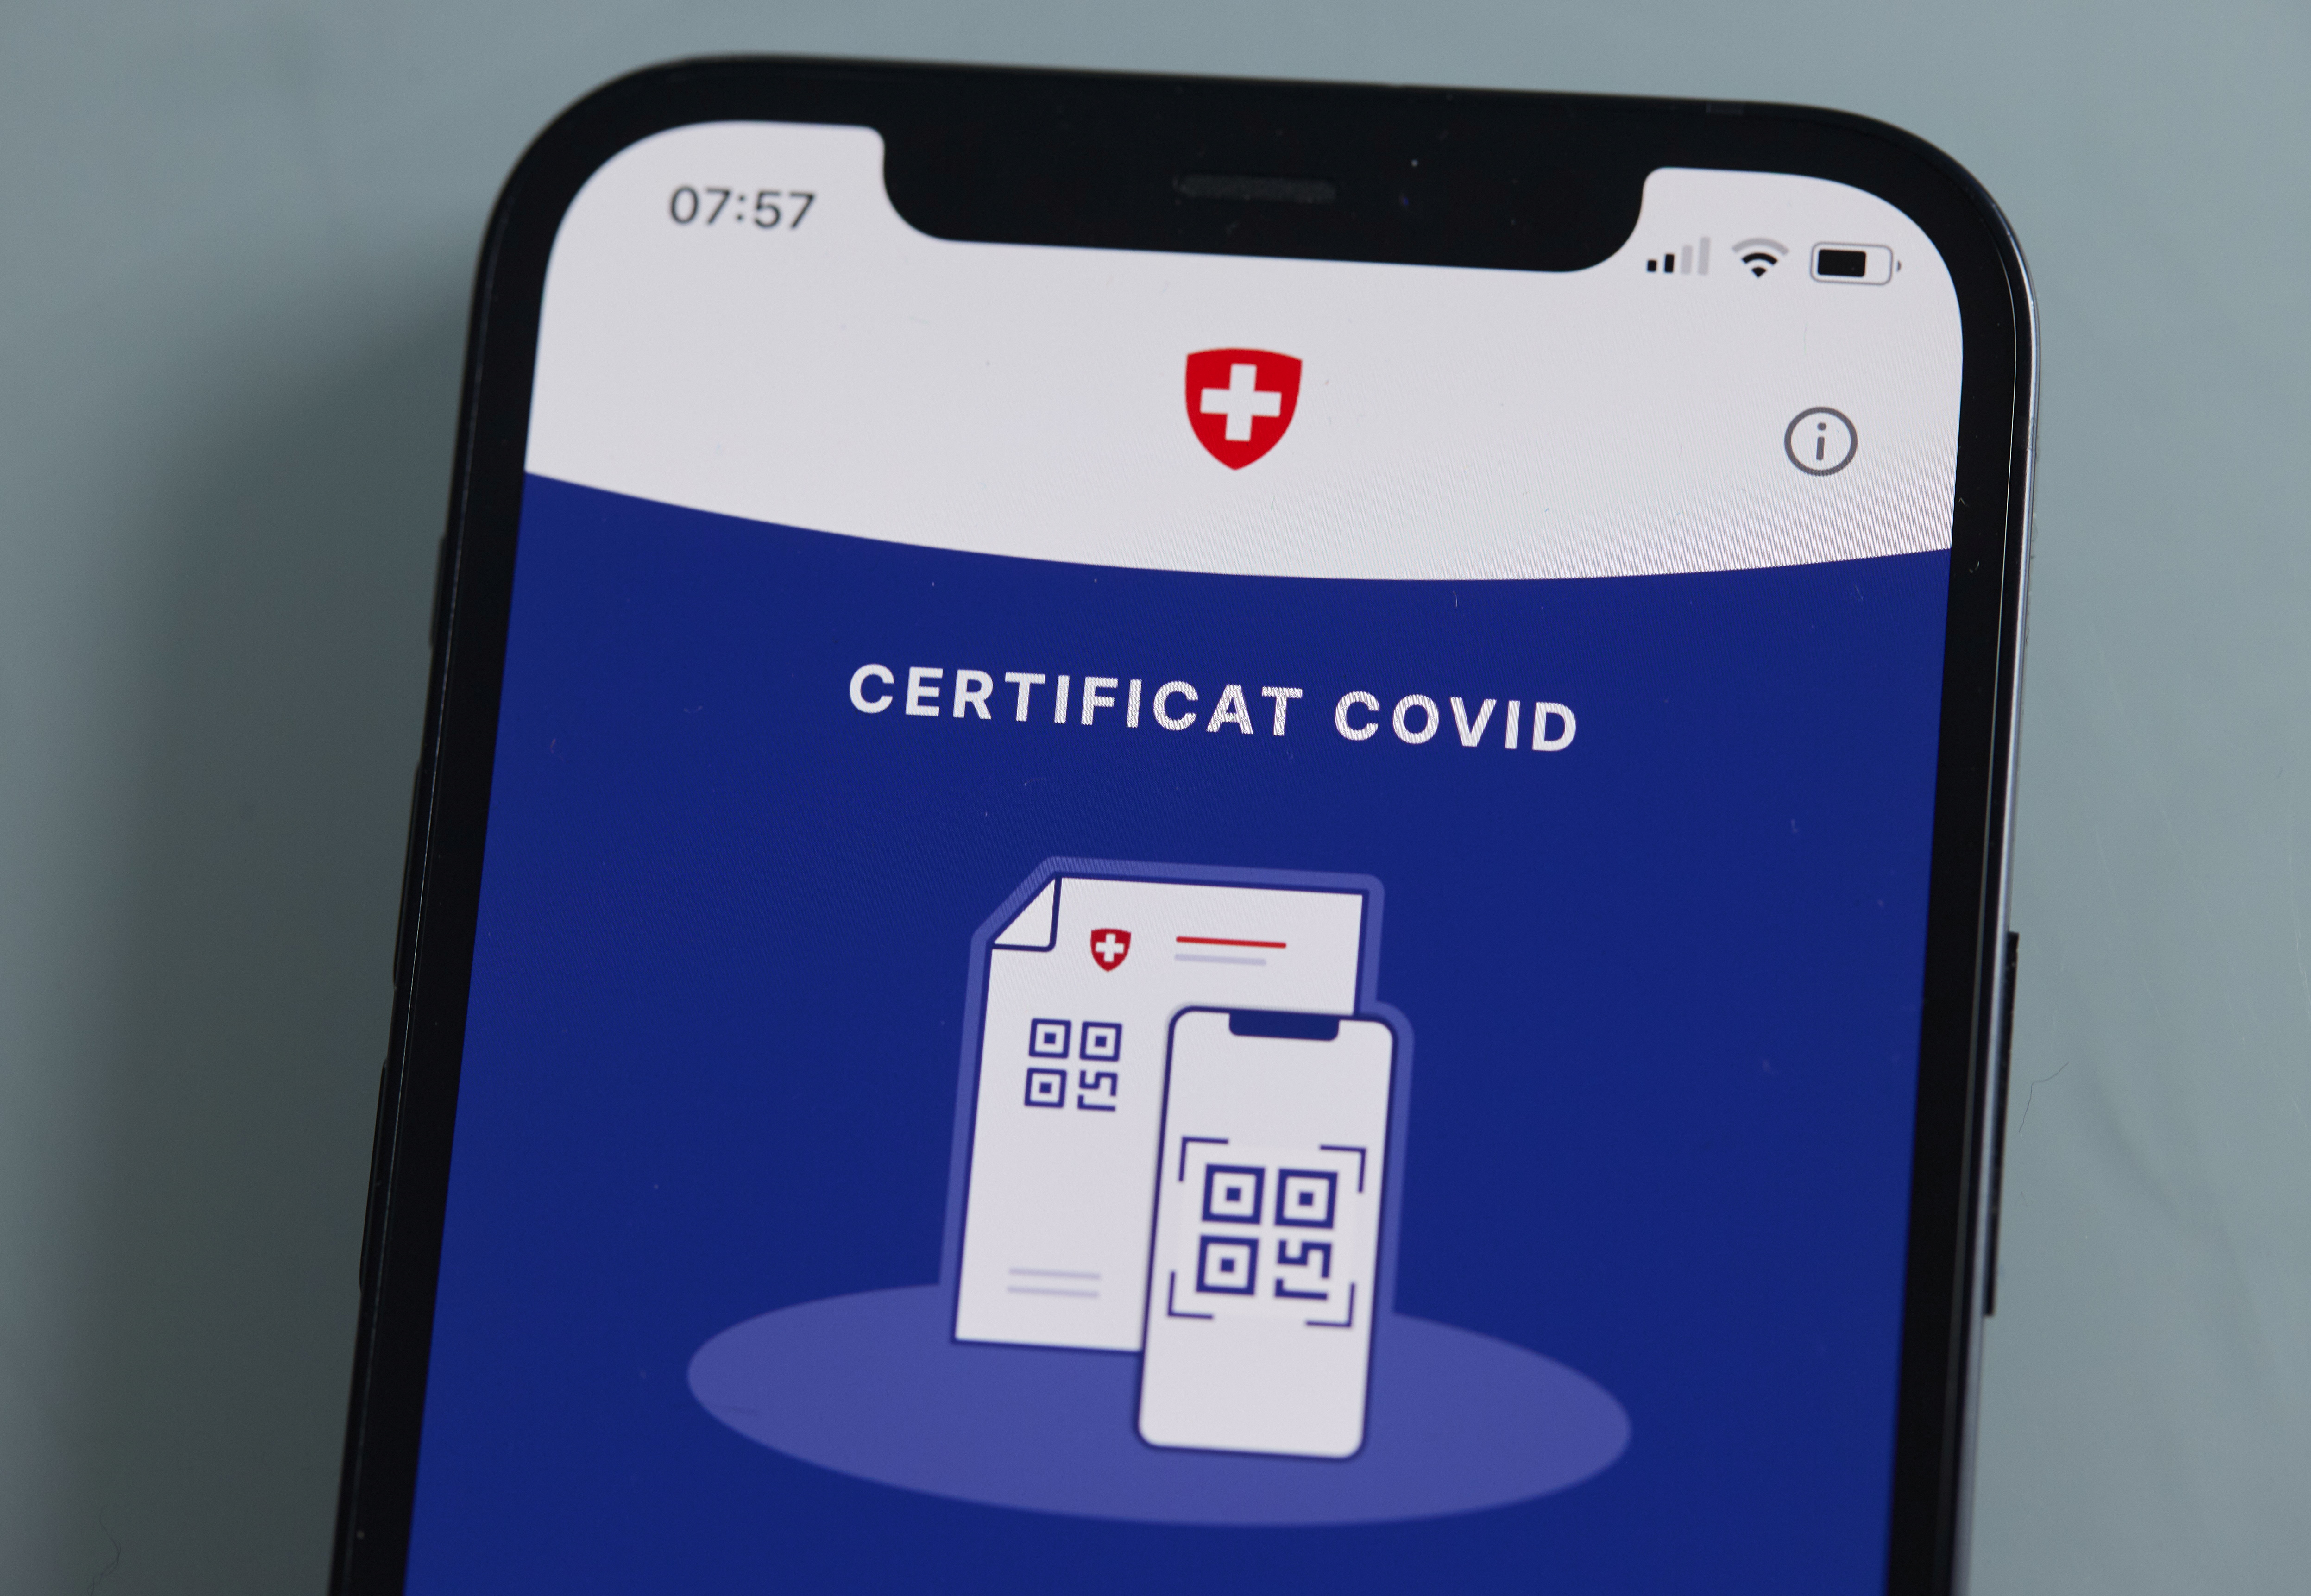 The 'Covid Certificate' application of Switzerland is seen in this illustration